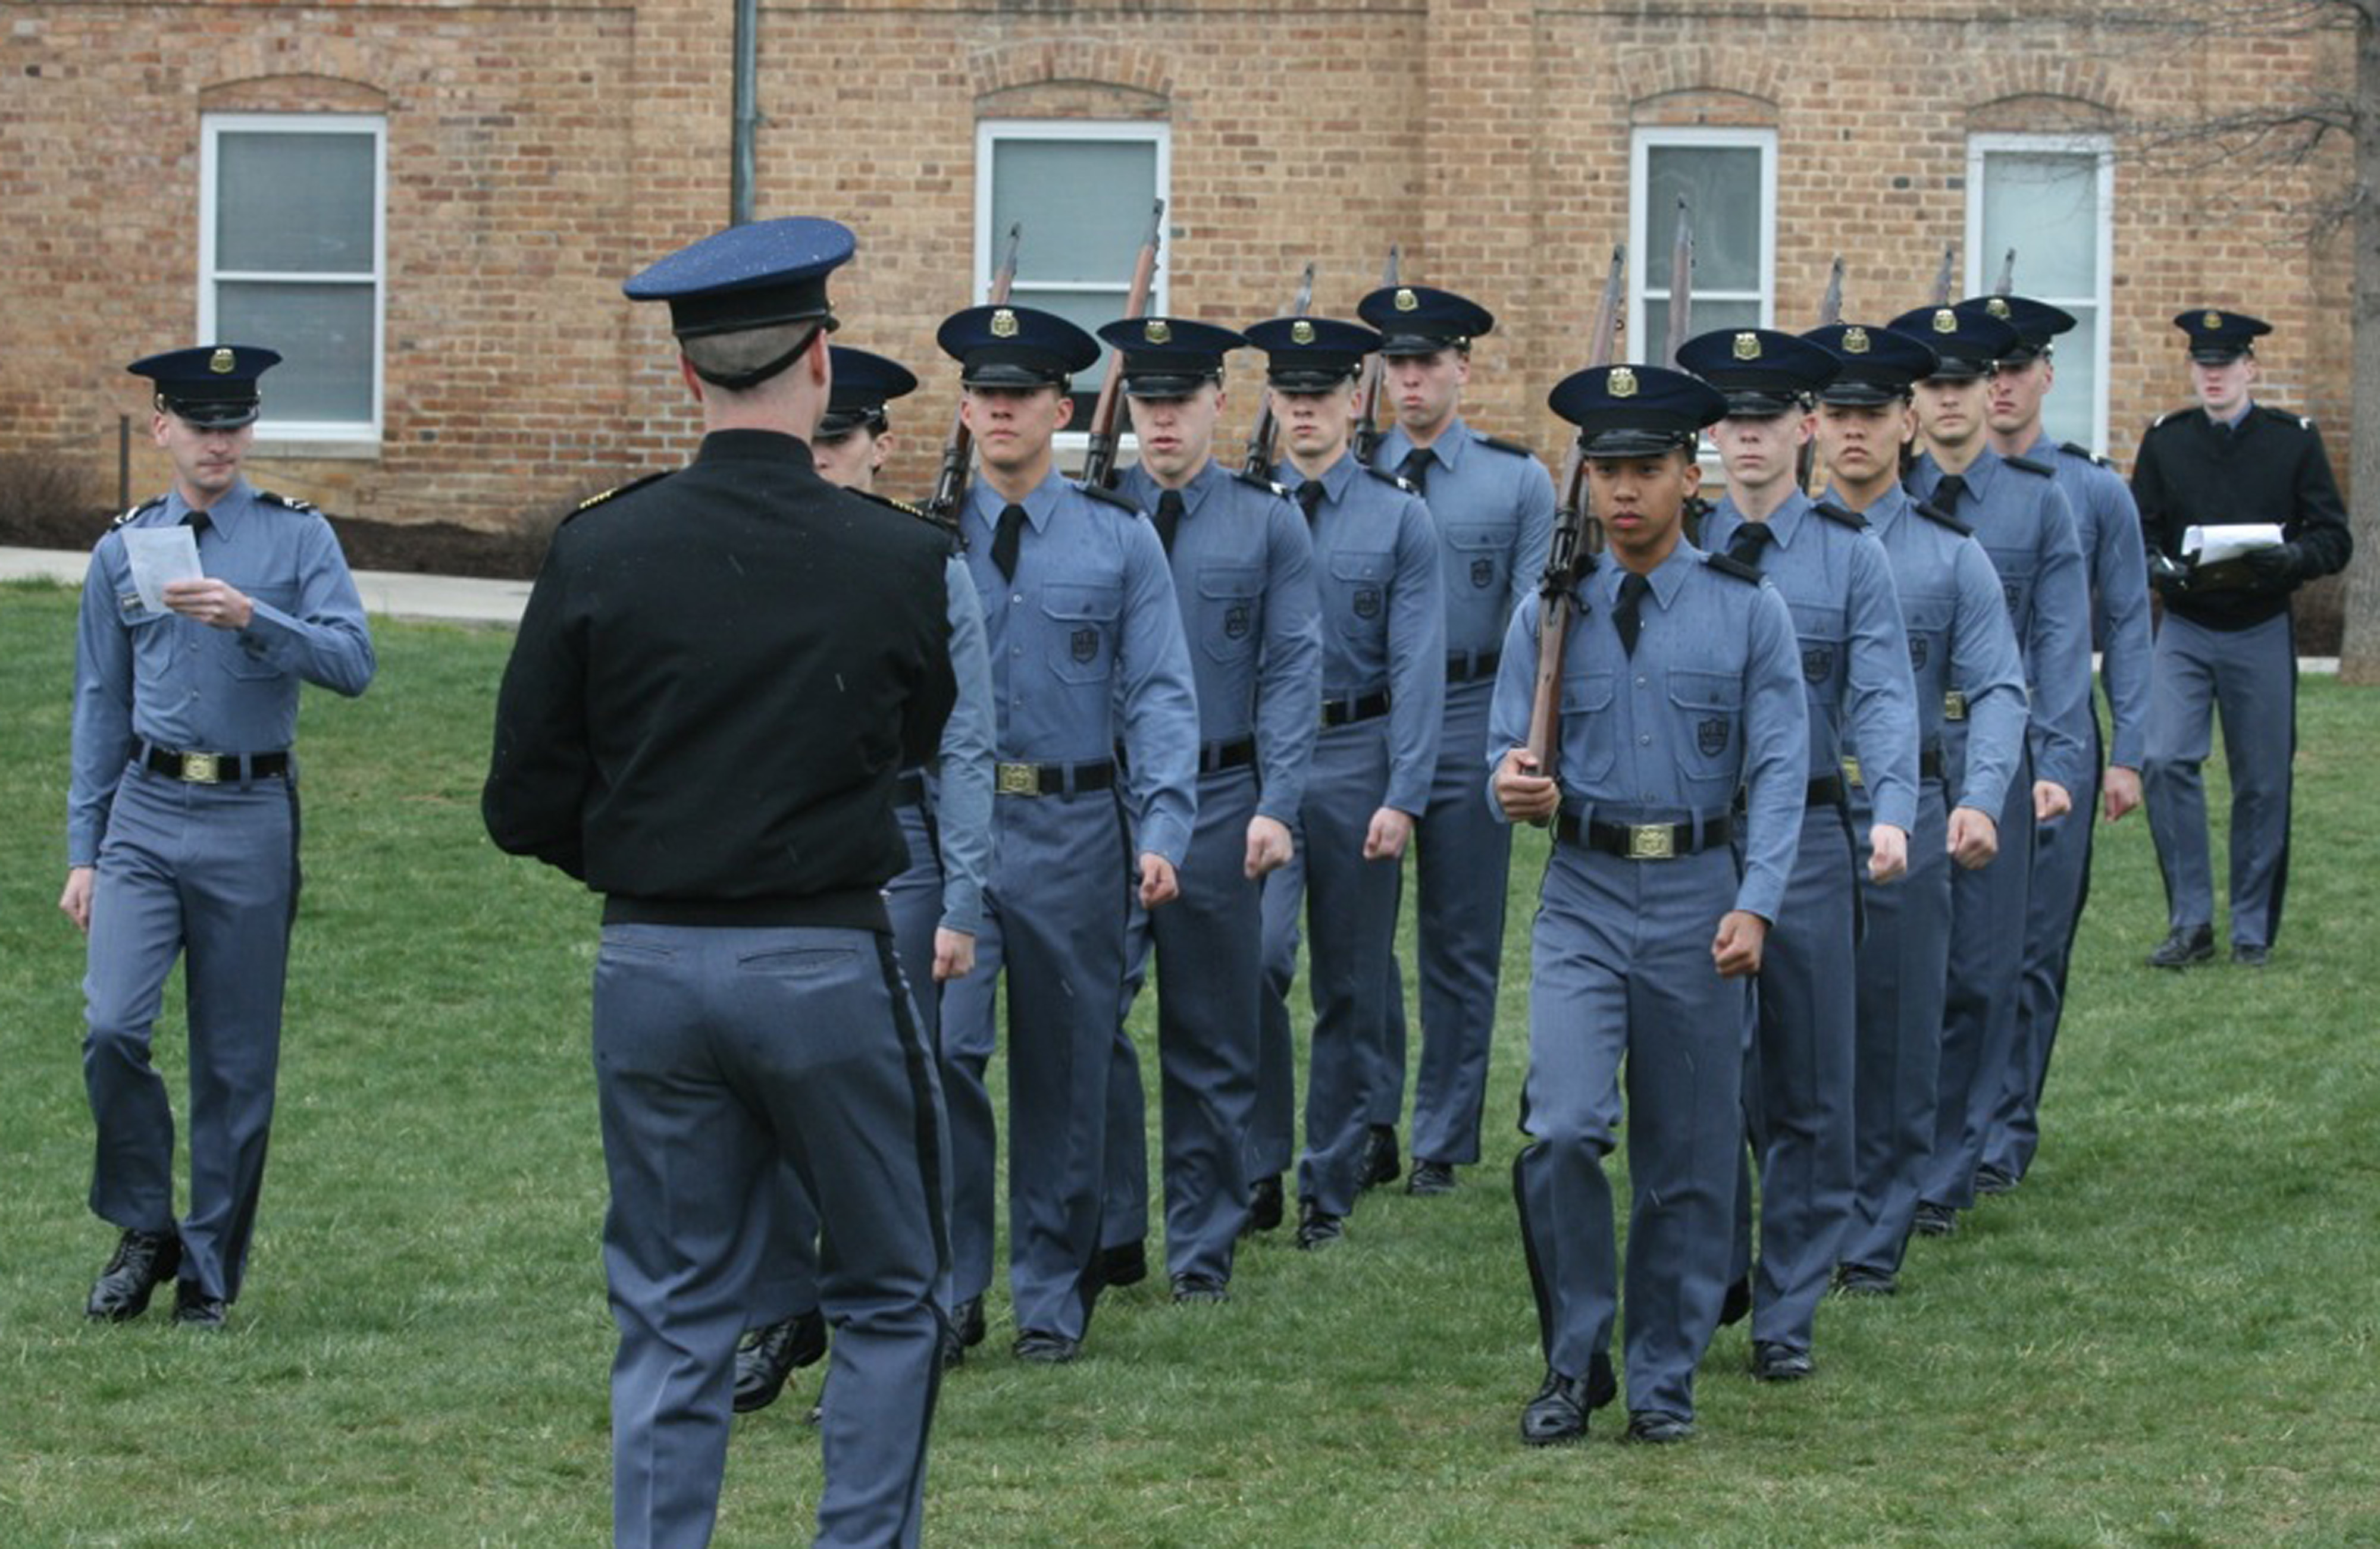 Members of Band Company, who won the Jaffe Eager Squad Trophy last spring, are seen competing in the marching portion of the competition on the Upper Quad